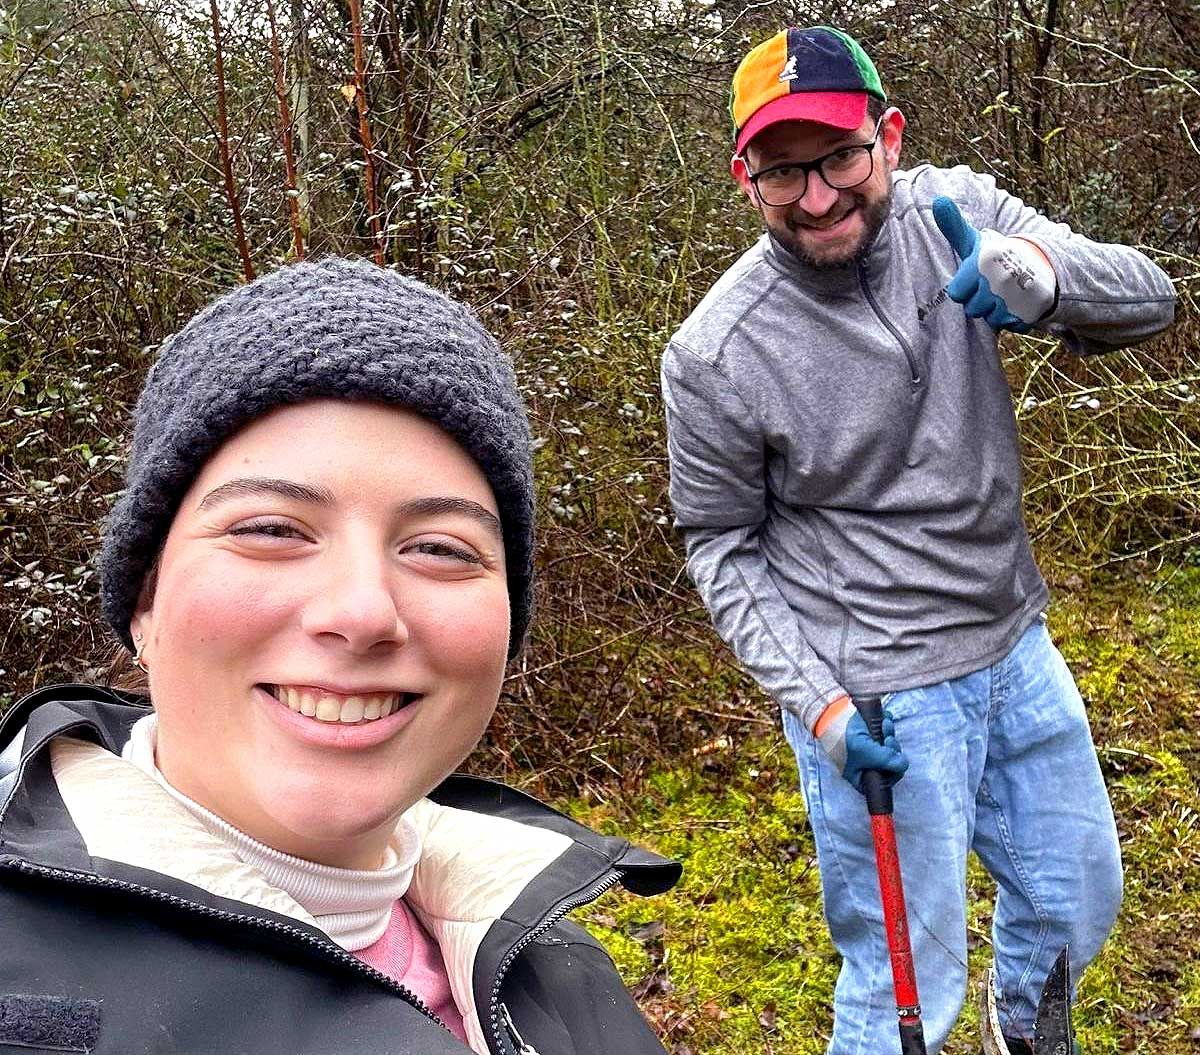 Two volunteers in front of some shrubs hold gardening tools and smile at the camera. 